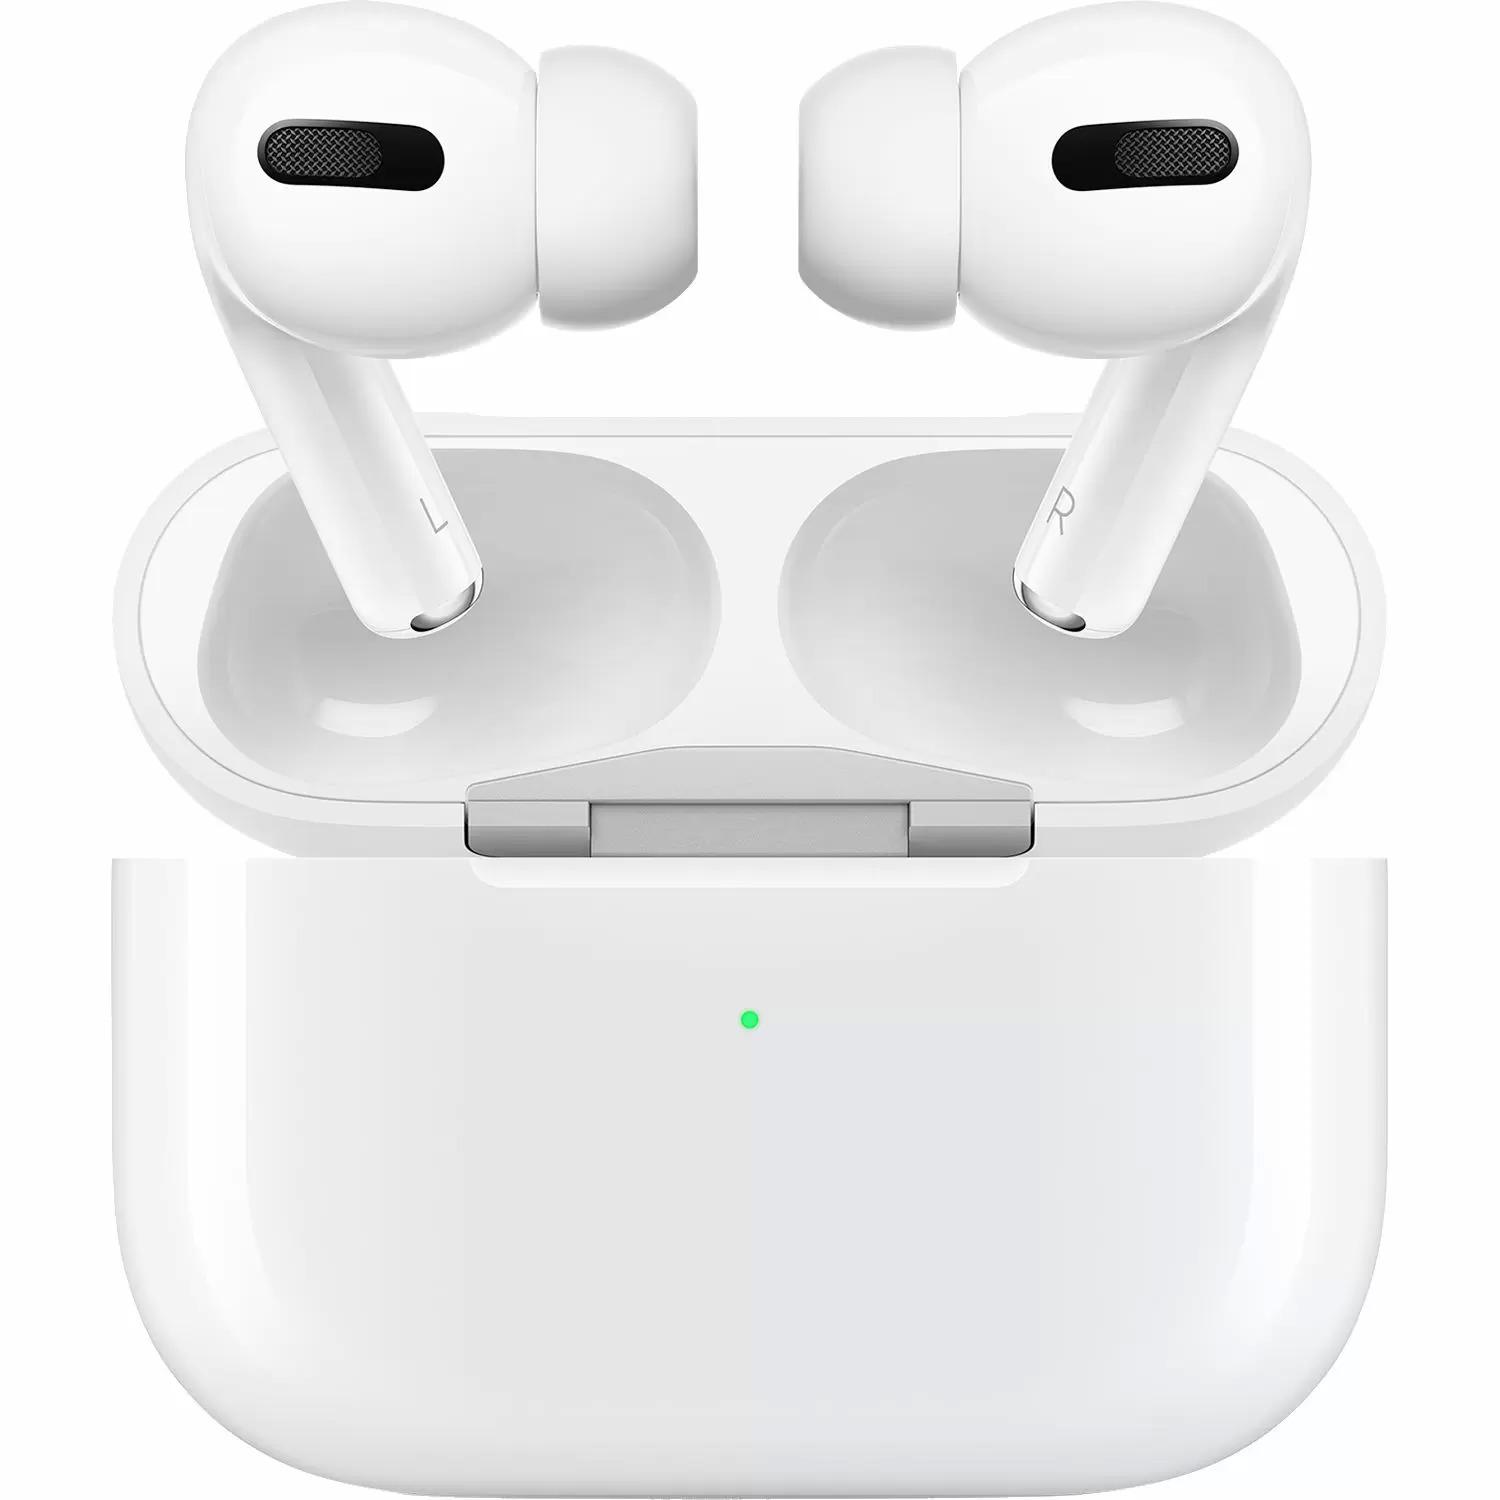 Apple AirPods Pro Wireless Earbuds for $169.99 Shipped